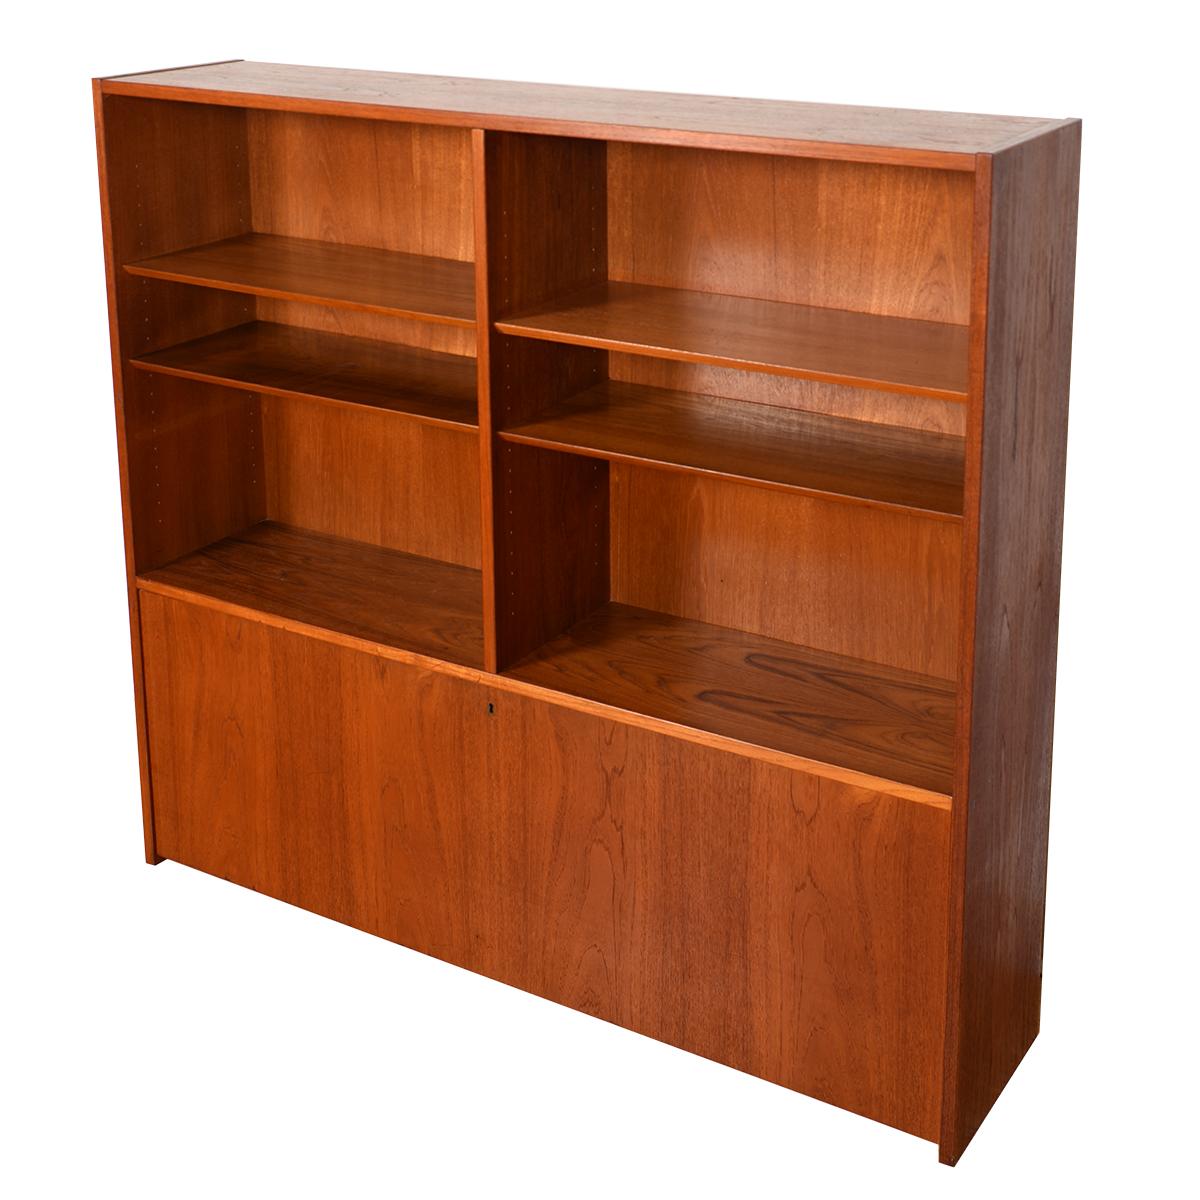 This Danish Modern teak bookcase display top will store your precious items in minimalist splendor. This piece can be set directly on the floor or can be placed atop a cabinet. The 4 teak shelves are all adjustable. Drop-down door has behind it 2